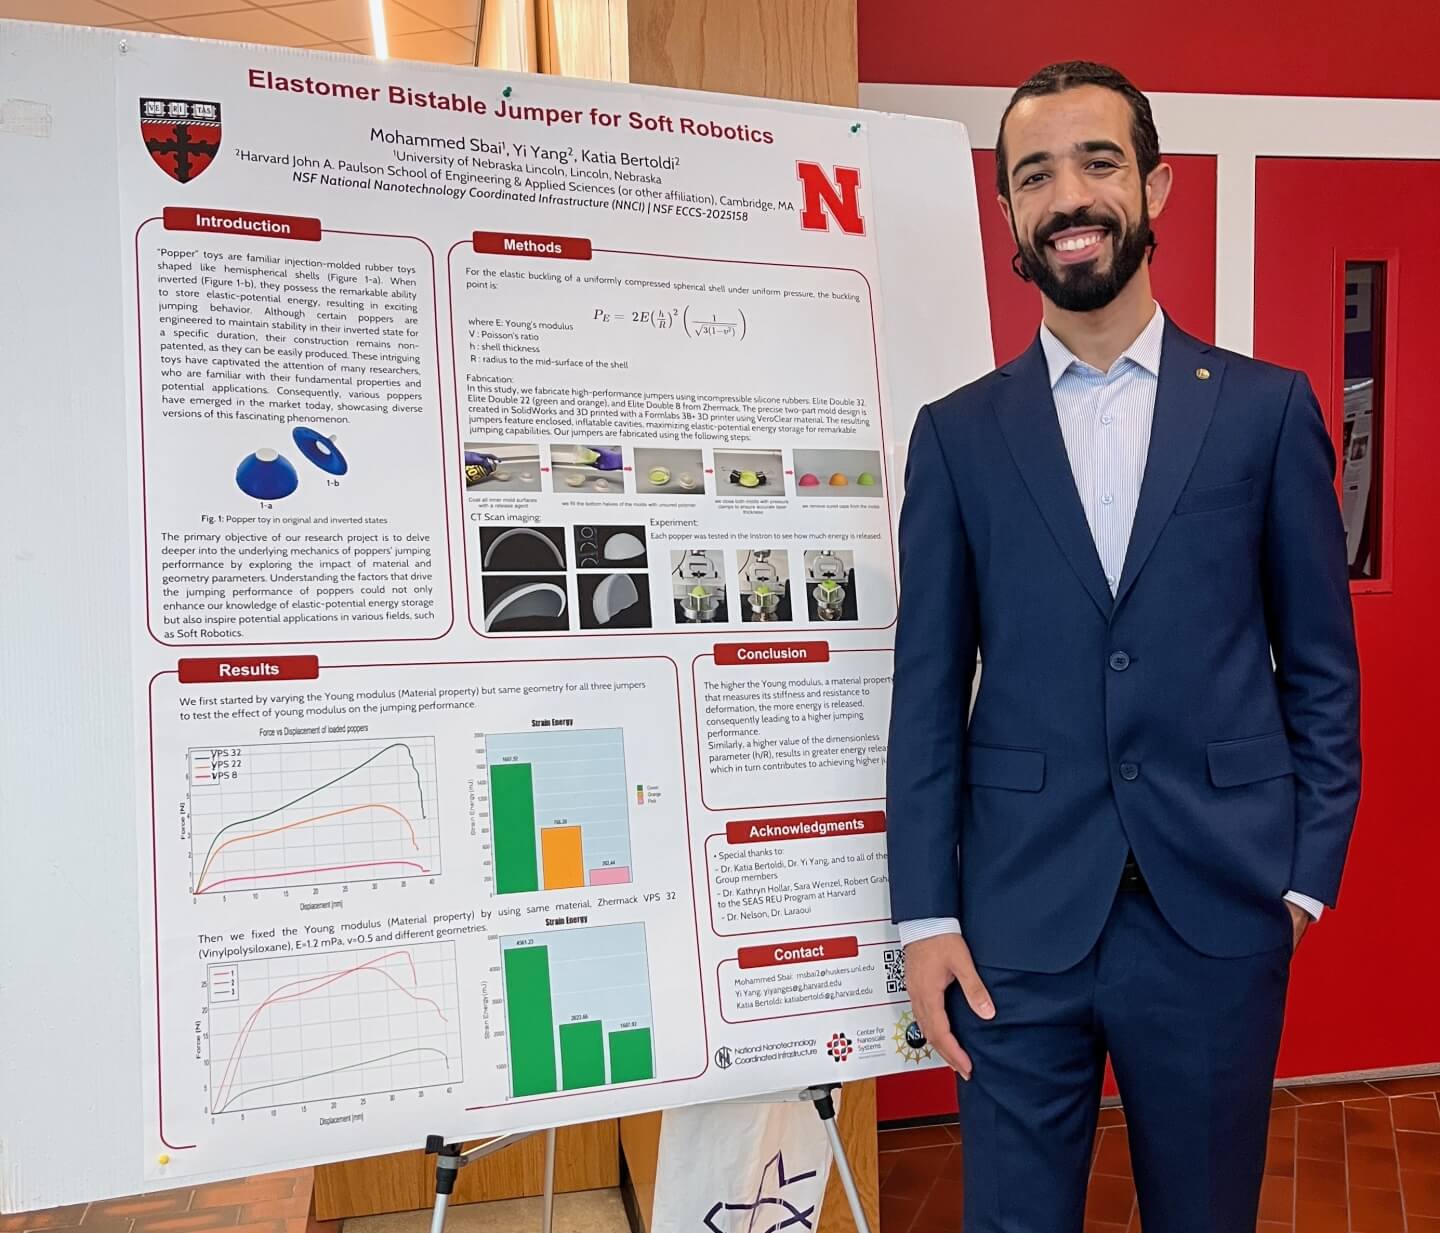 Mohammed Sbai, a senior mechanical engineering major at the University of Nebraska, with his REU research poster